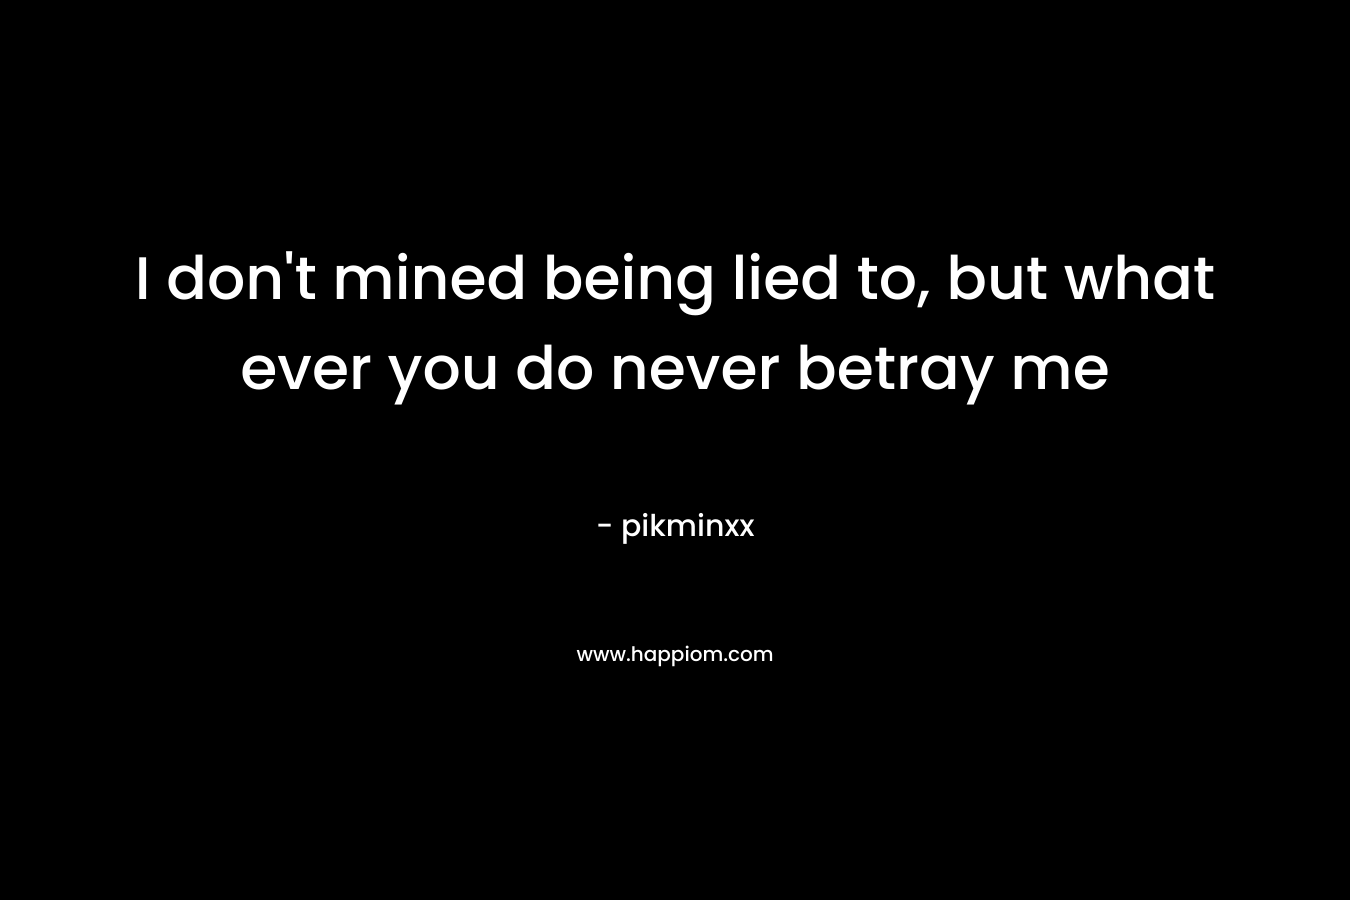 I don't mined being lied to, but what ever you do never betray me